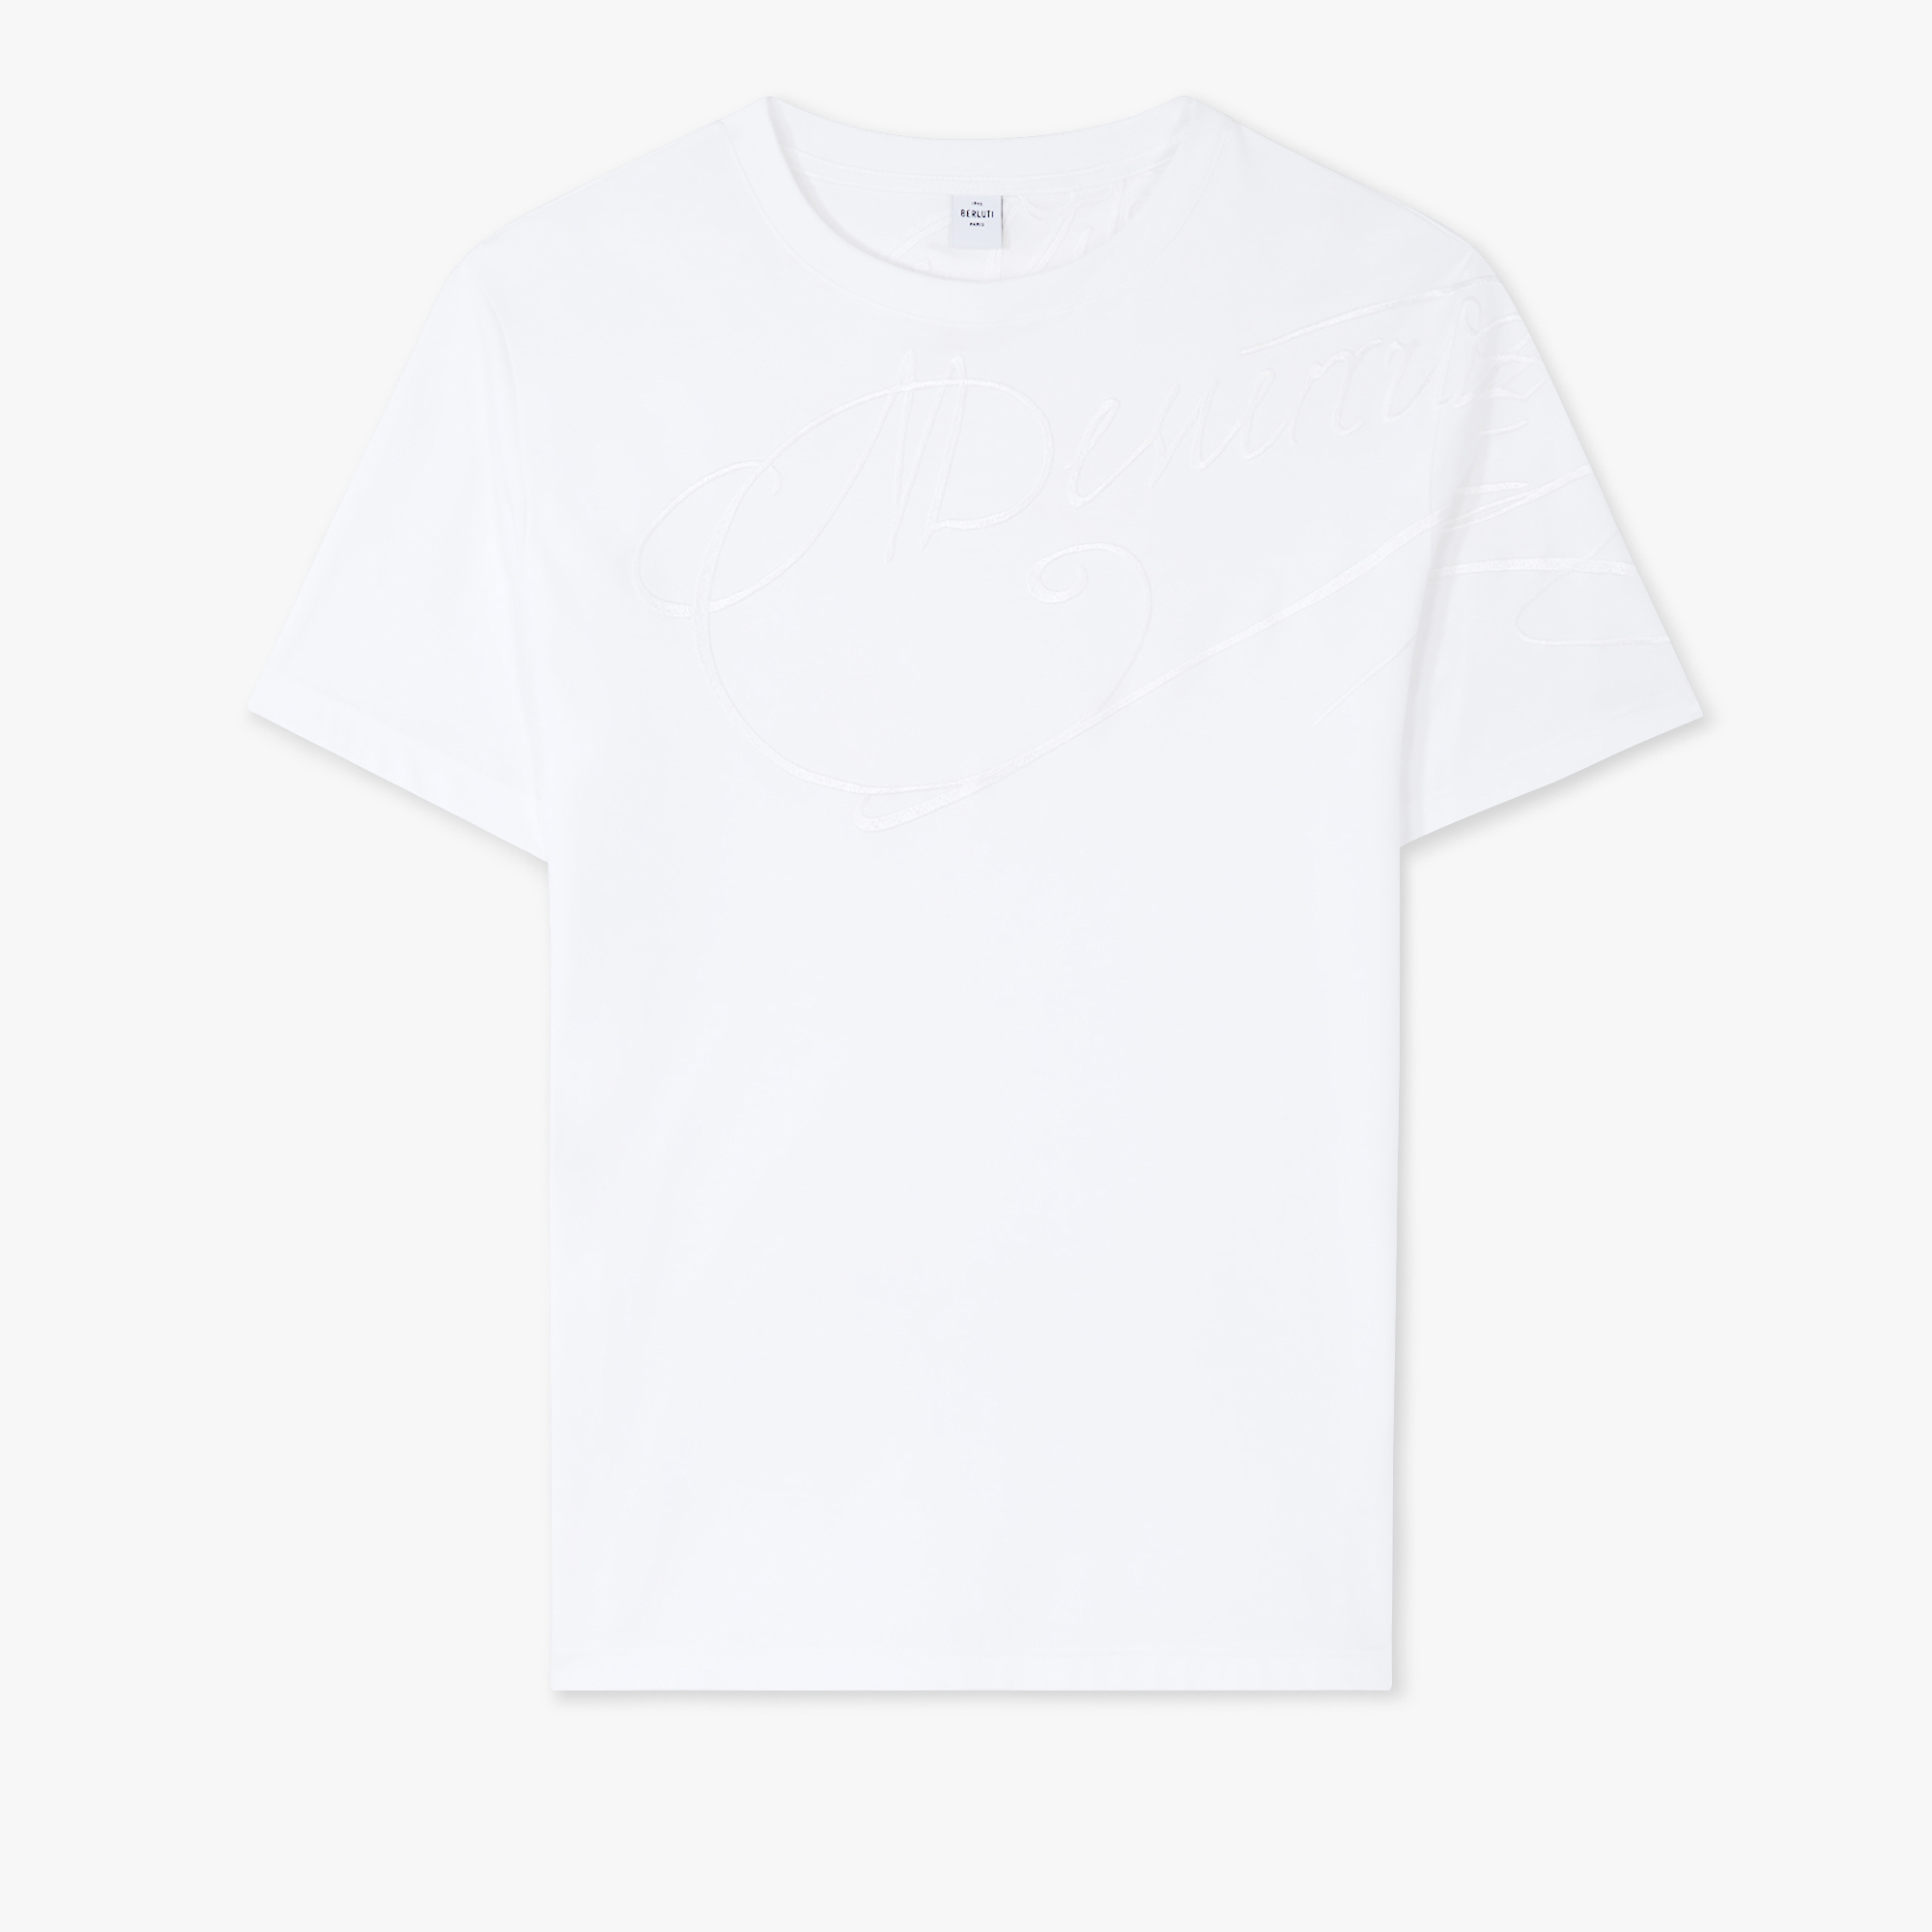 Embroidered Scritto T-Shirt, BLANC OPTIQUE, hi-res